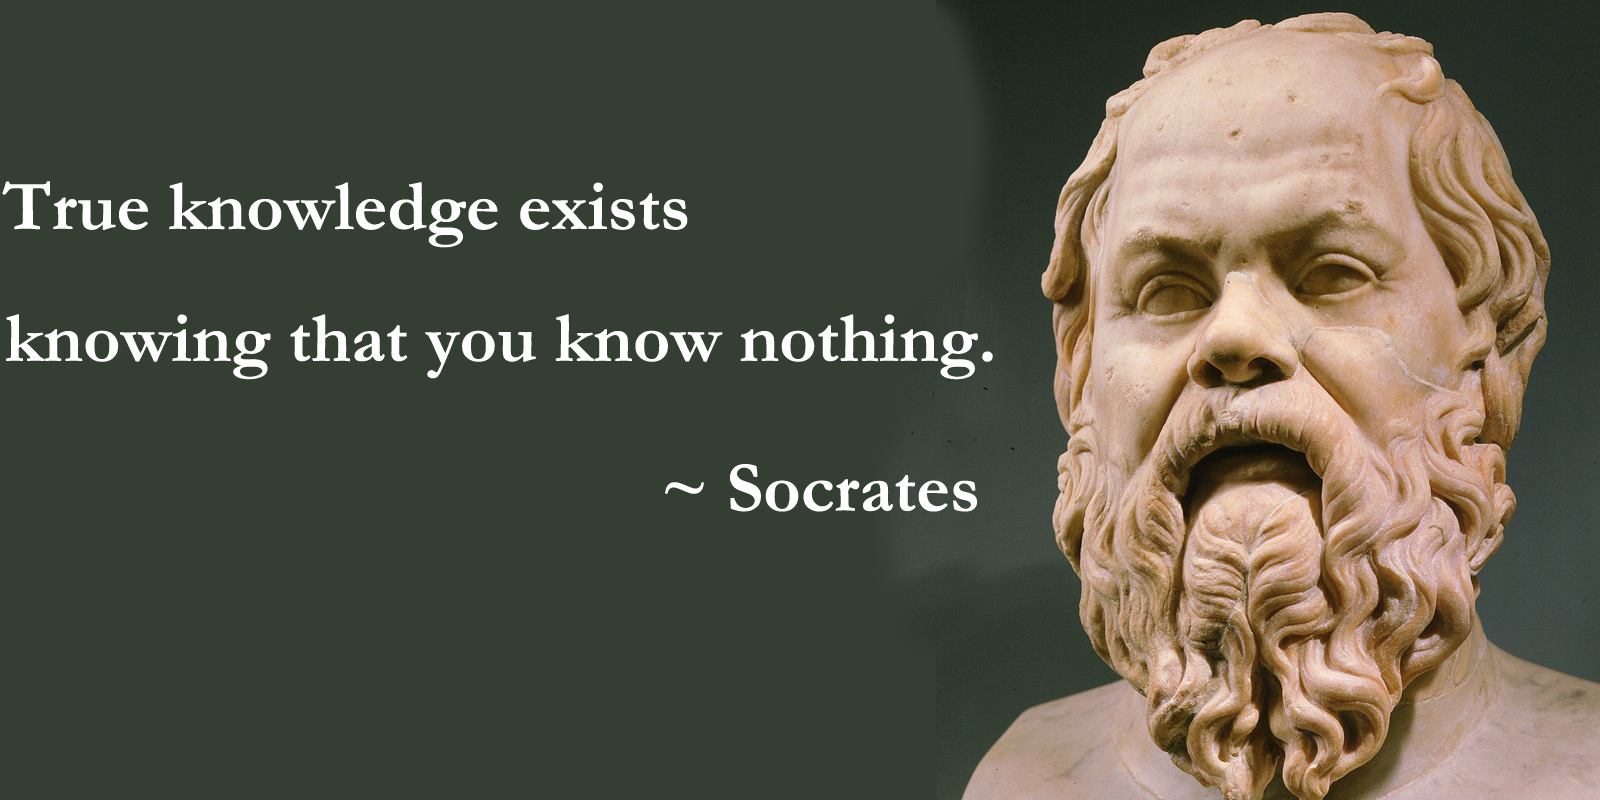 Quotes of Wisdom by Socrates